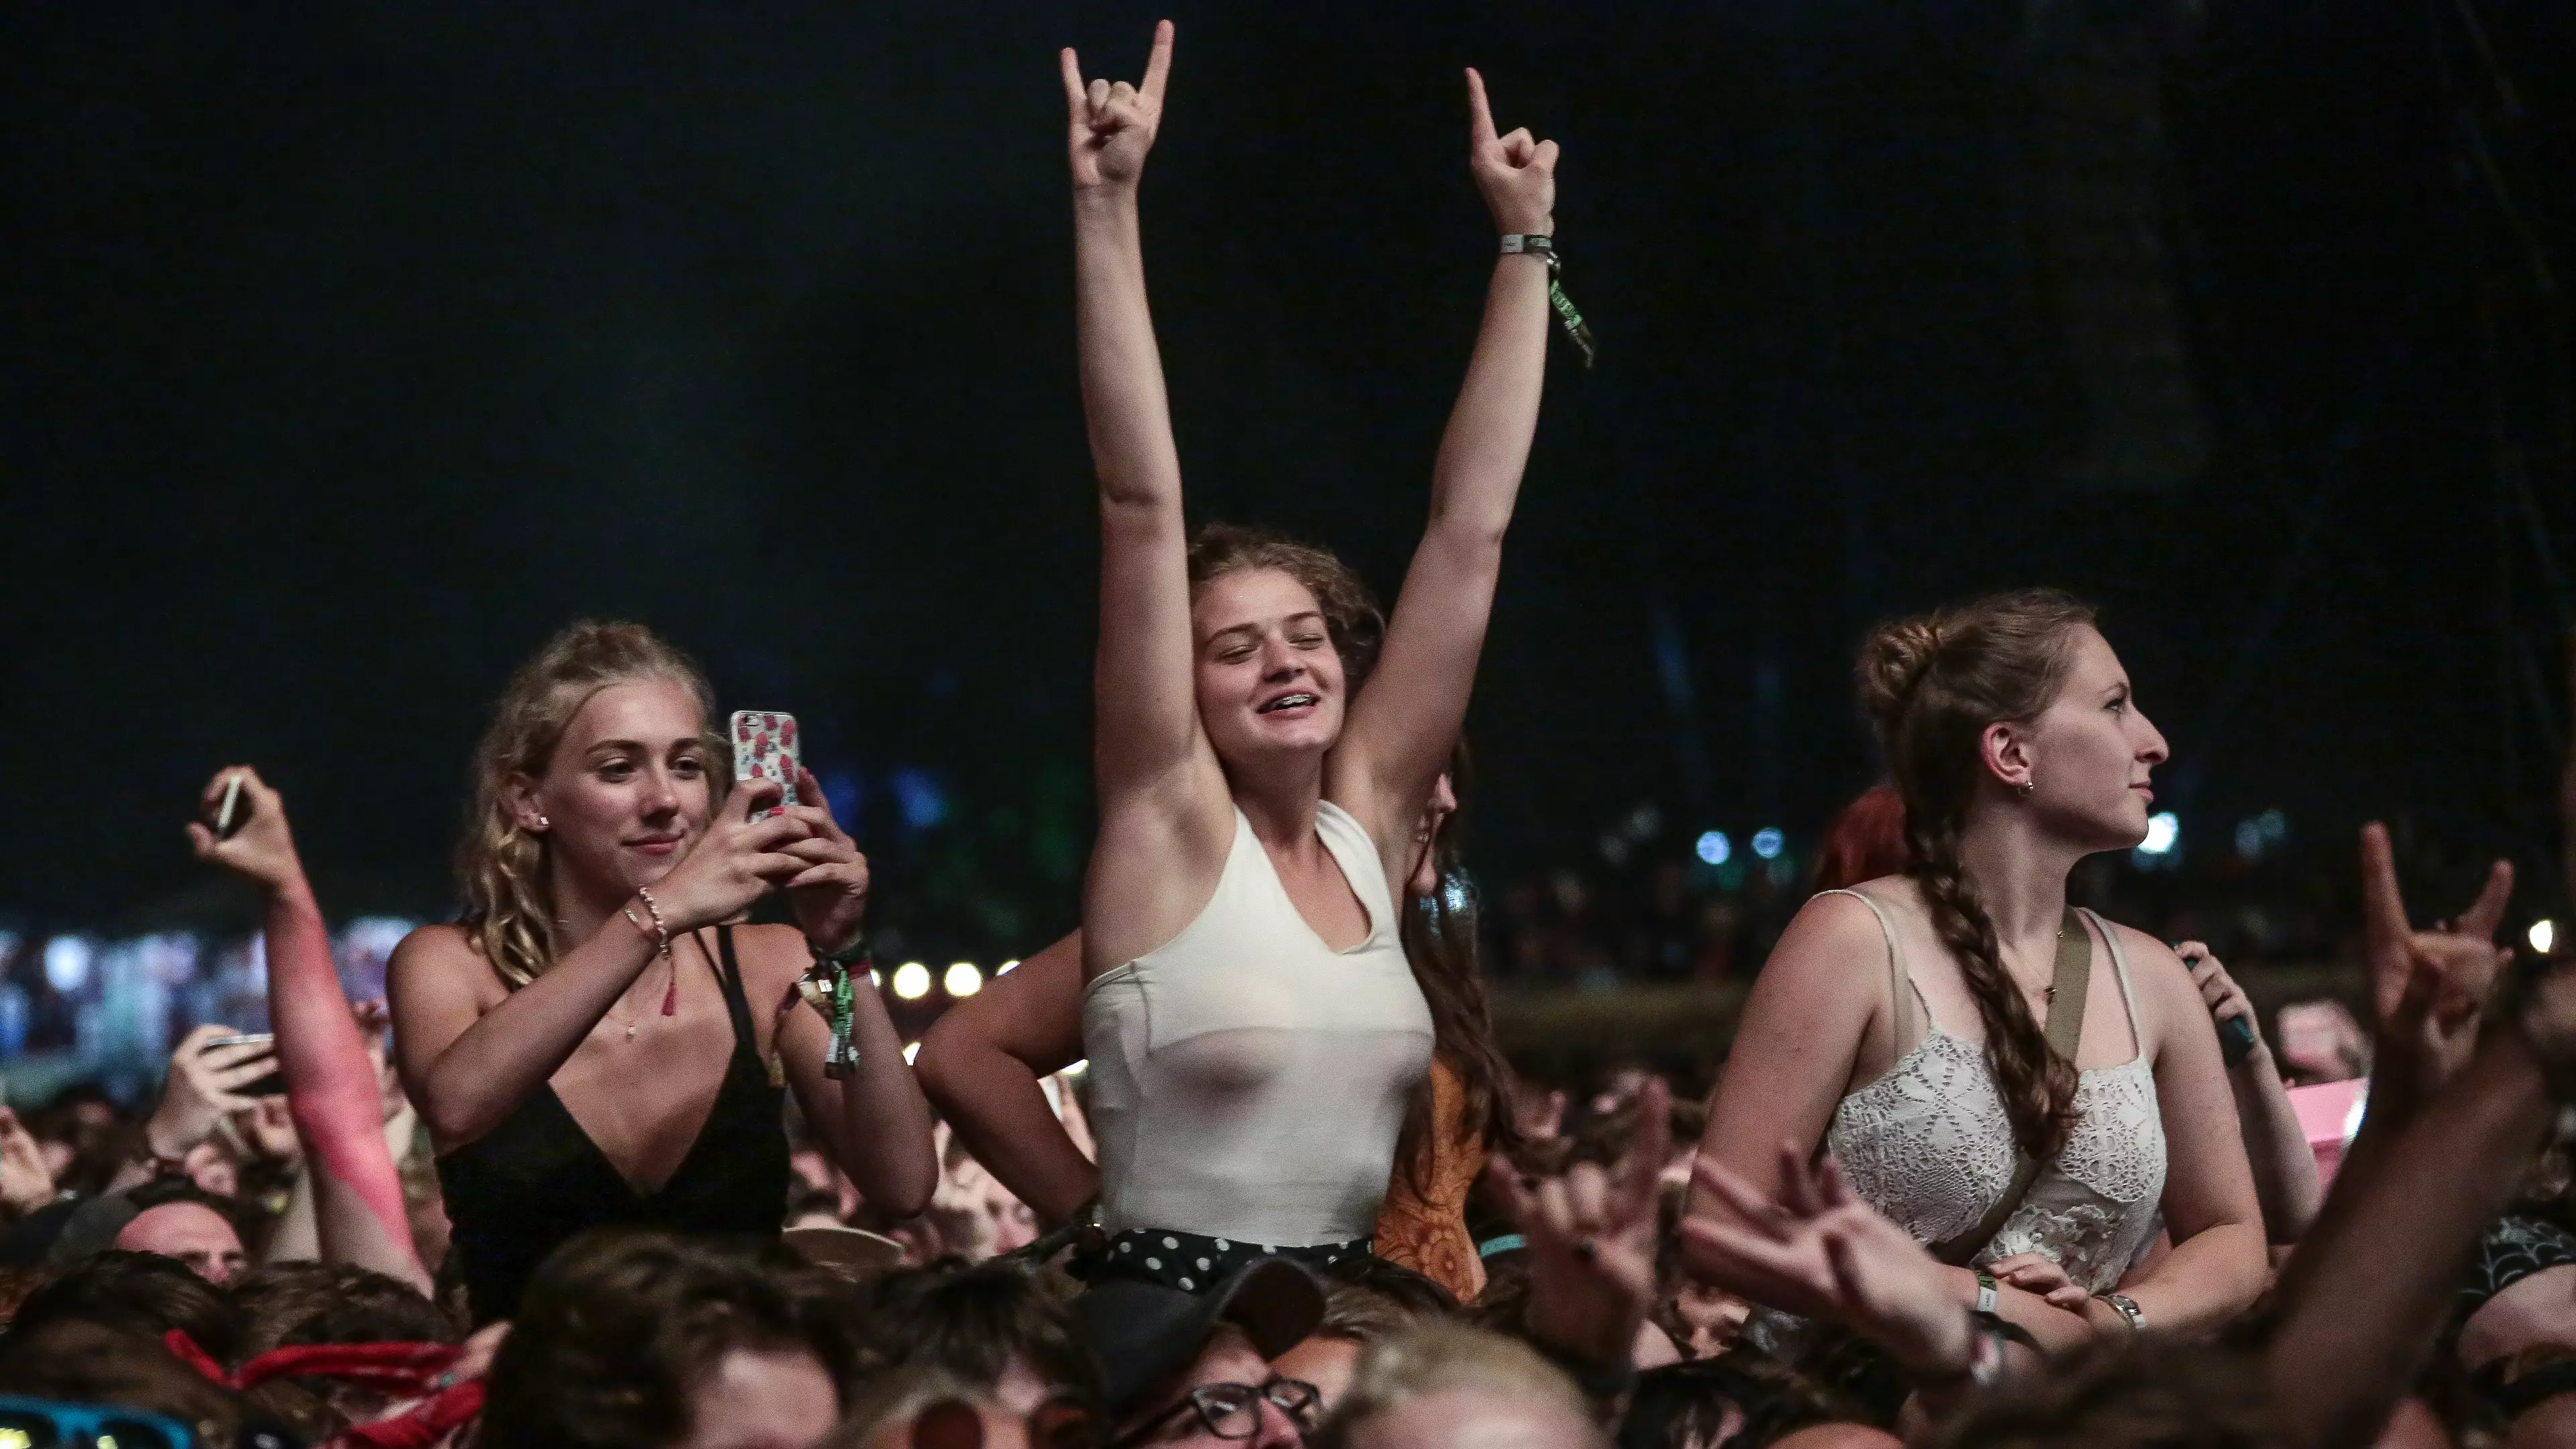 Festival X Is Getting Requests To Give People A 'Work Meeting' So They Don't Have To Go To Work